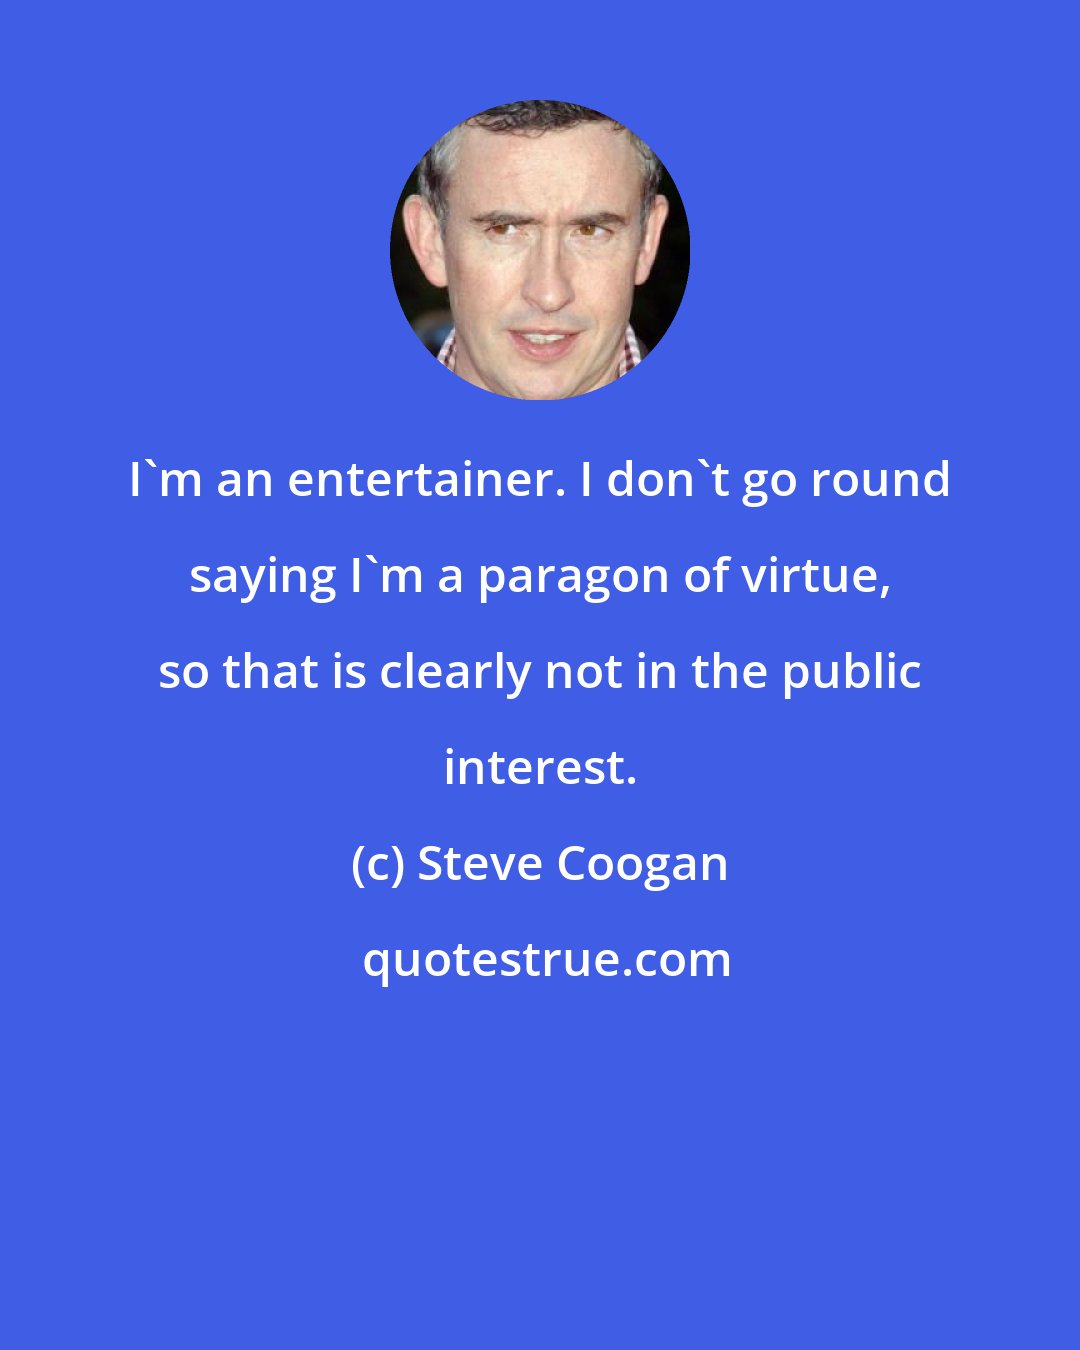 Steve Coogan: I'm an entertainer. I don't go round saying I'm a paragon of virtue, so that is clearly not in the public interest.